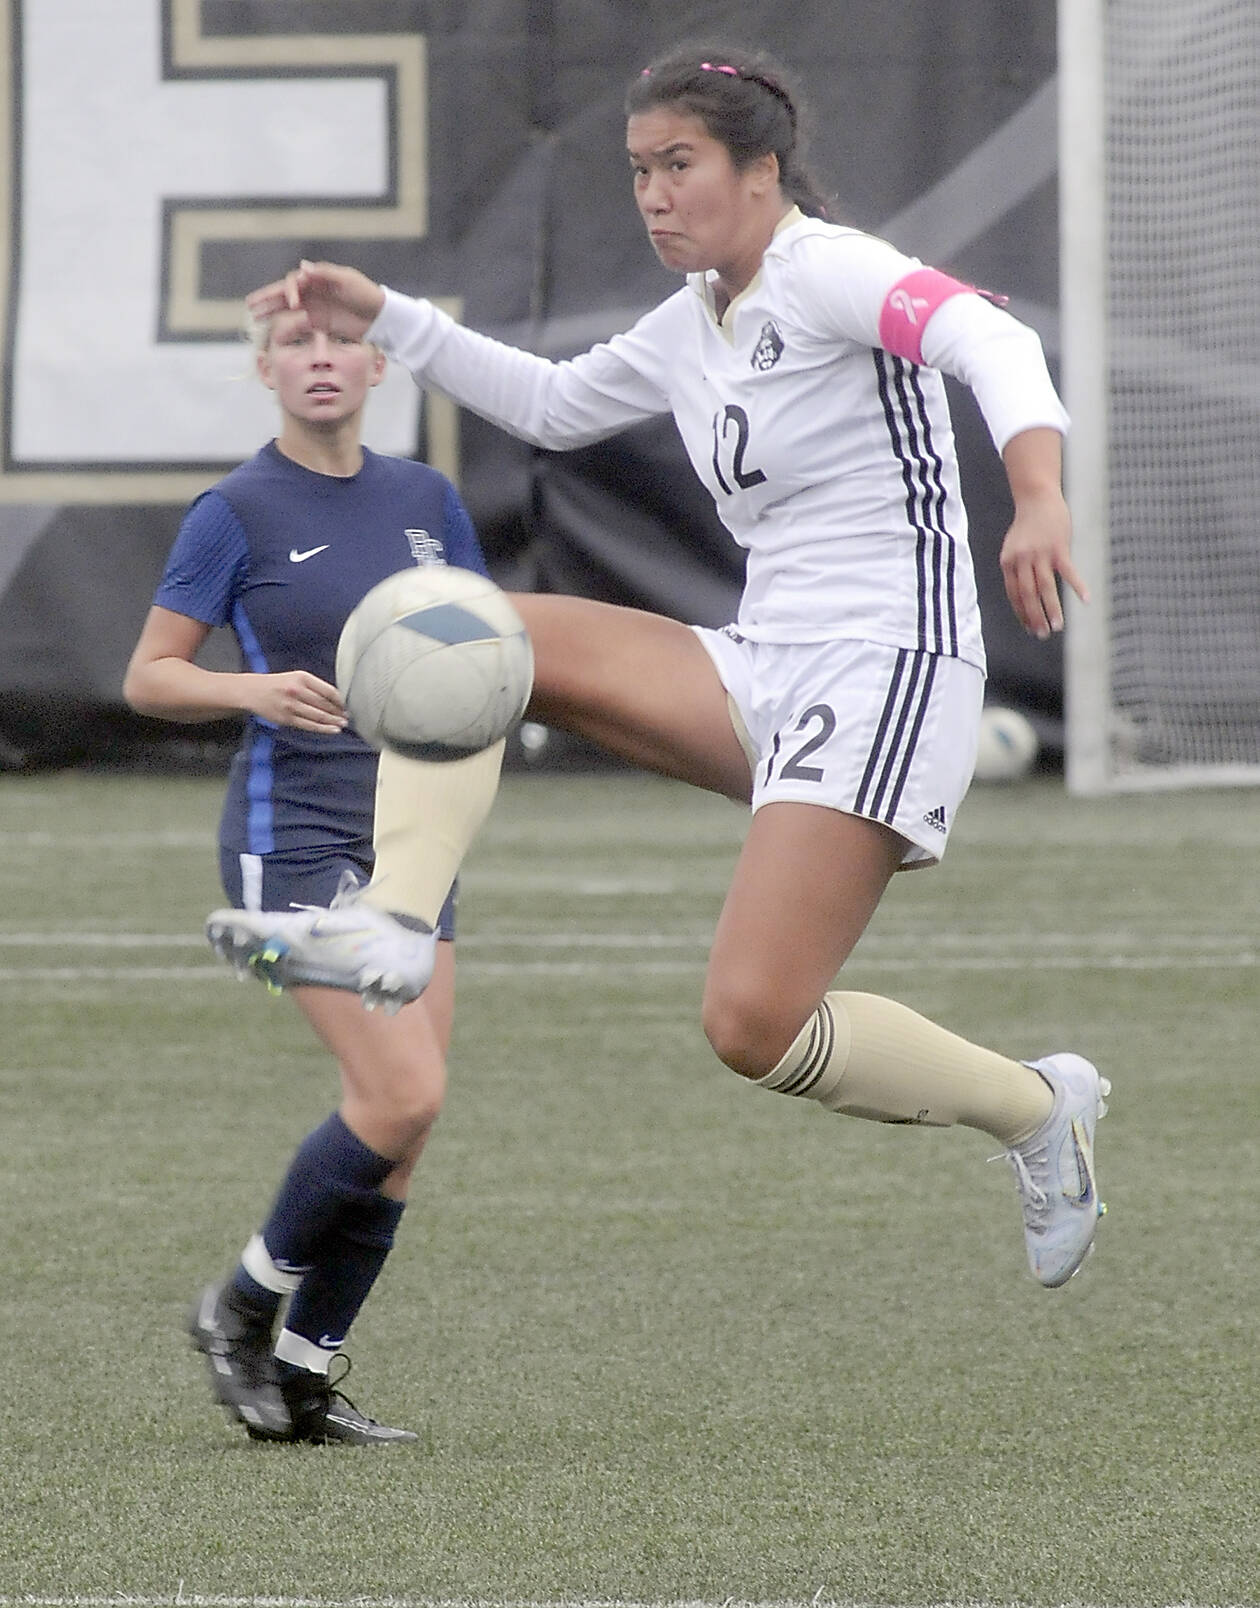 KEITH THORPE/PENINSULA DAILY NEWS Peninsula's Keilee Silva kicks high for the ball while Bellevue's Daisy Morris looks on during Wednesday's game in Port Angeles.